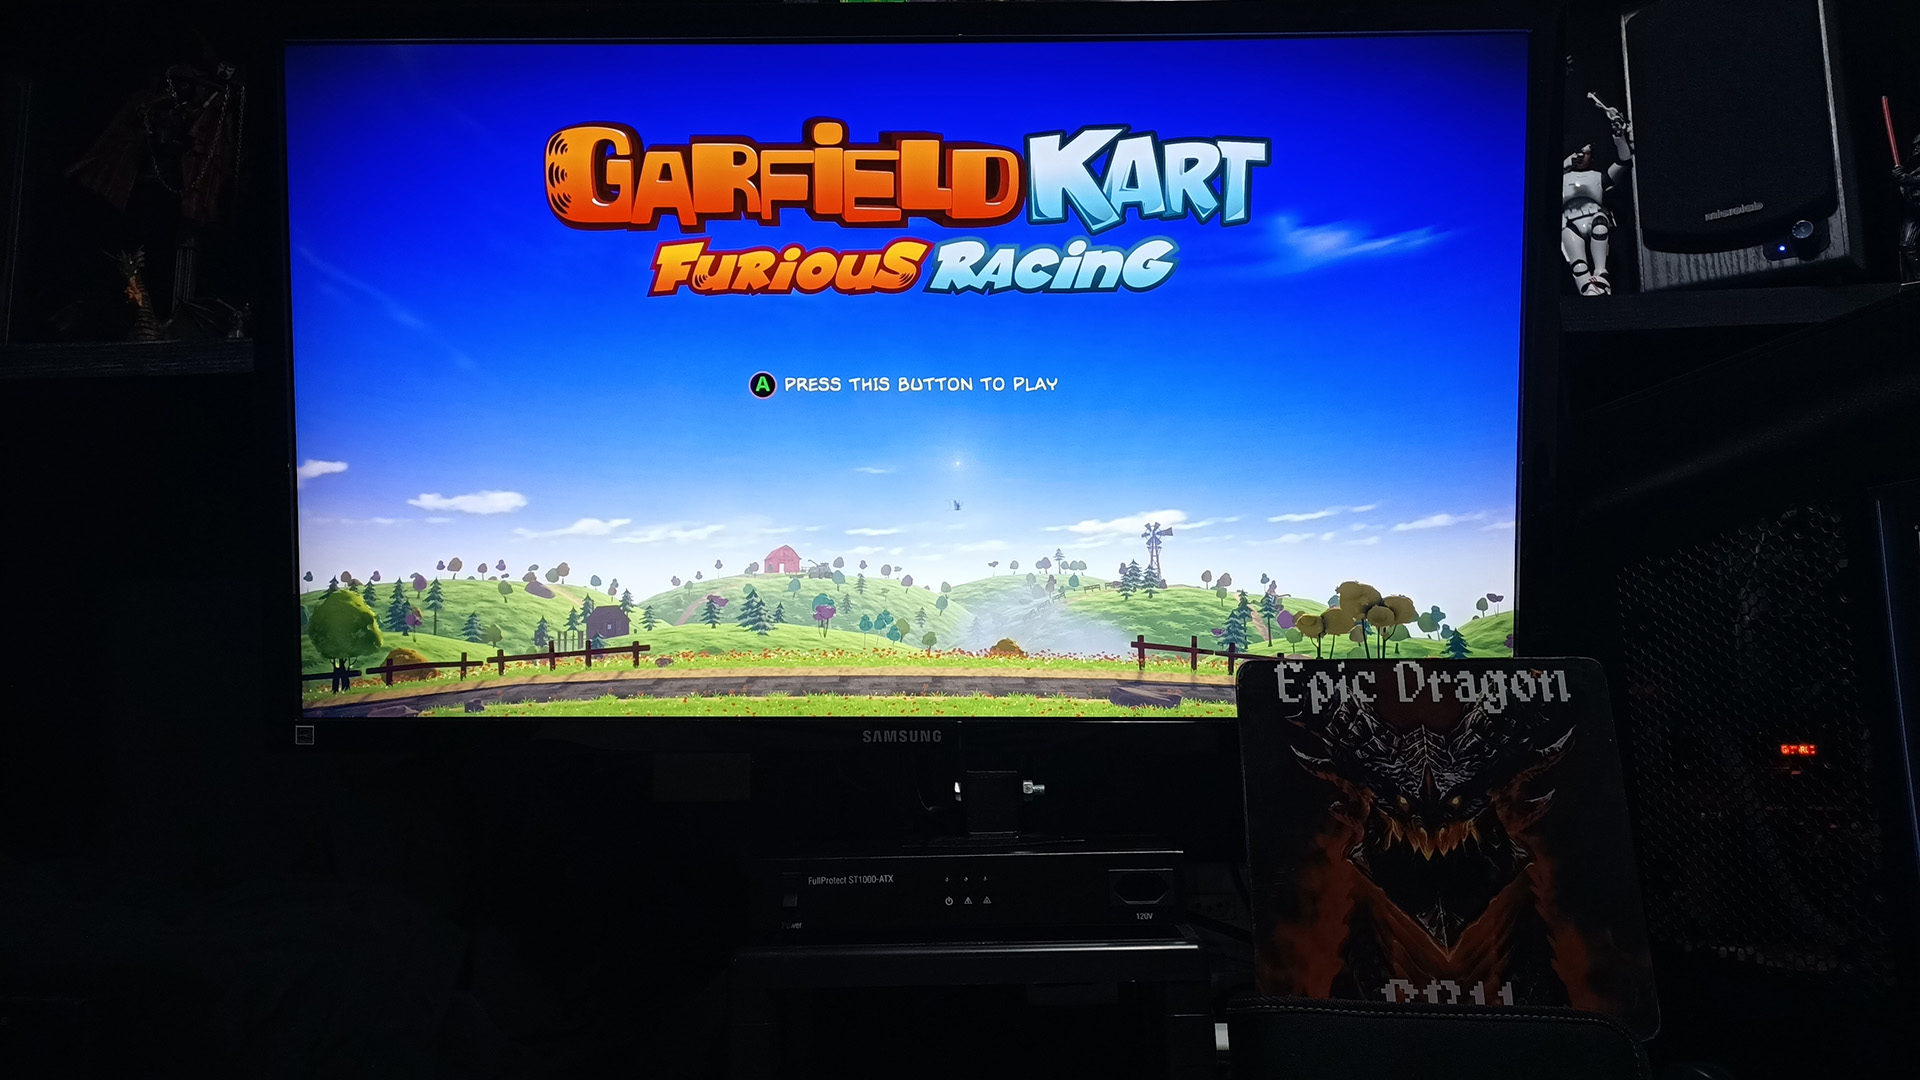 EpicDragon: Garfield Kart Furious Racing: Mally Market [Time Trial: 3 Laps] (PC) 0:01:38.553 points on 2022-08-08 21:30:44